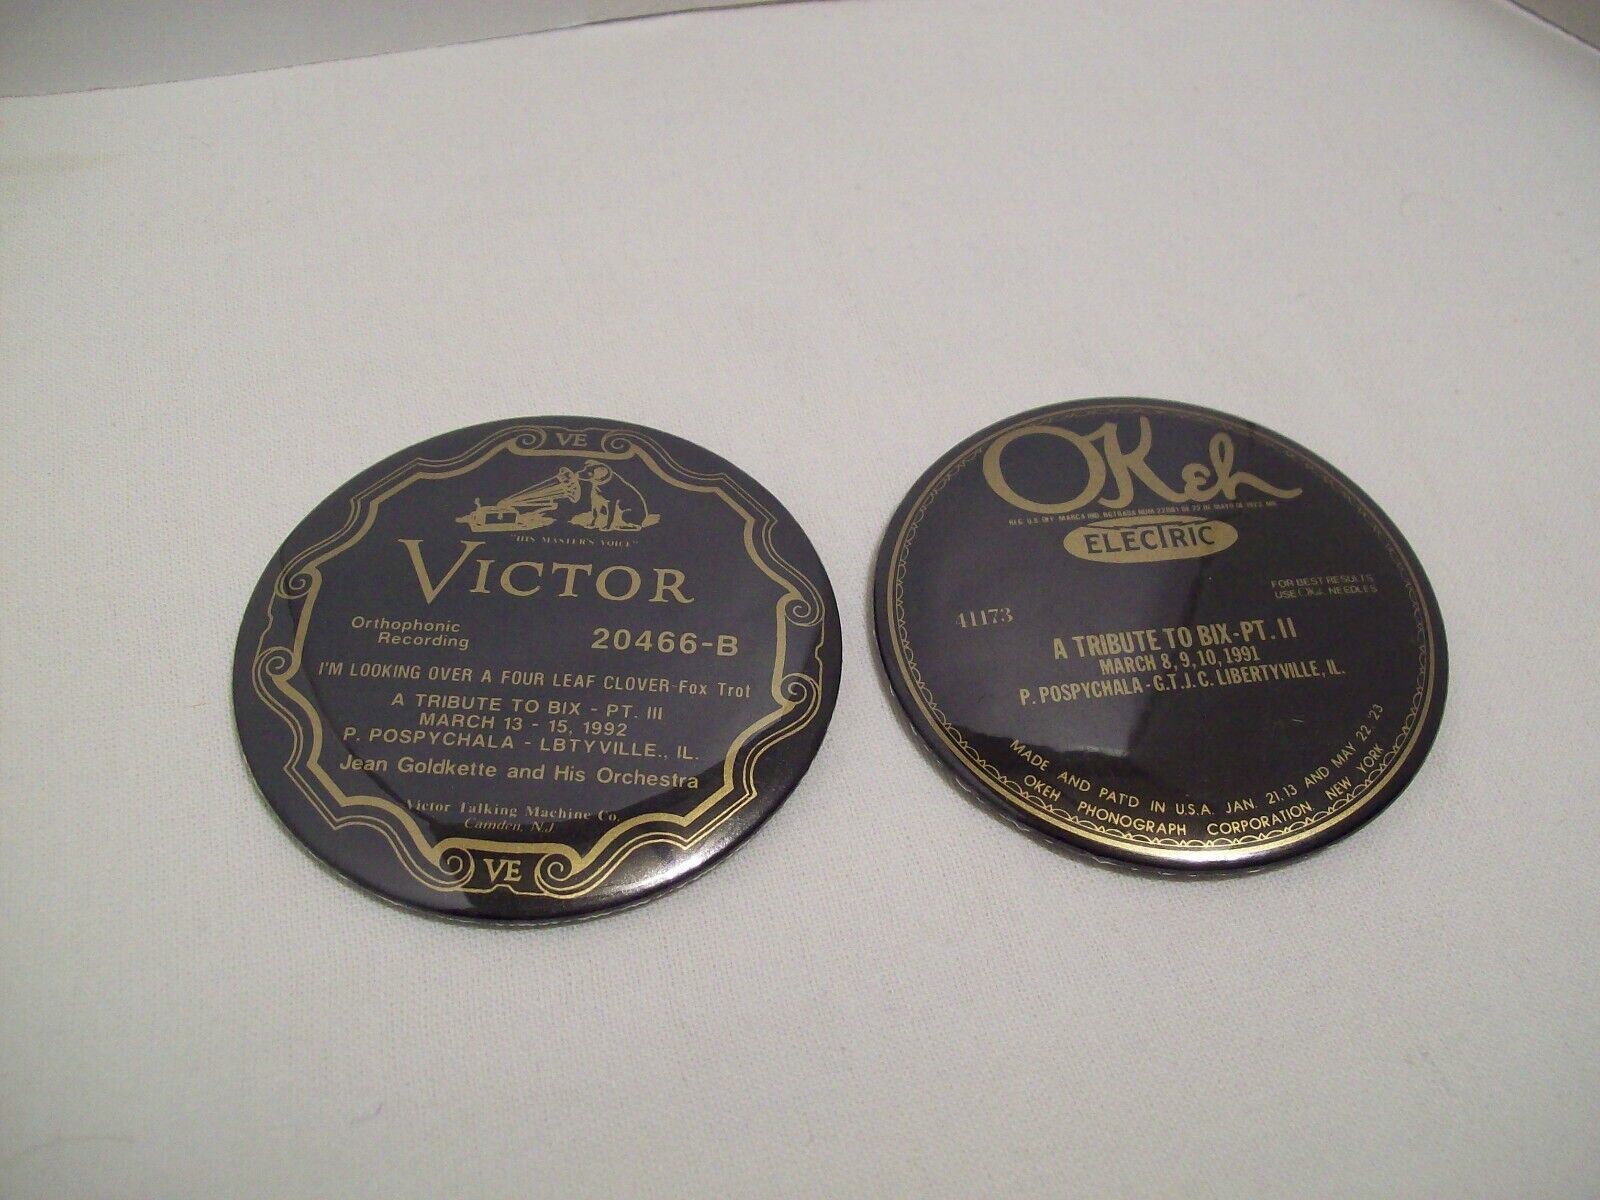 Primary image for Vtg Victor Orthophonic Records & Okeh Electric Pin Back Badge Buttons Toy Tex